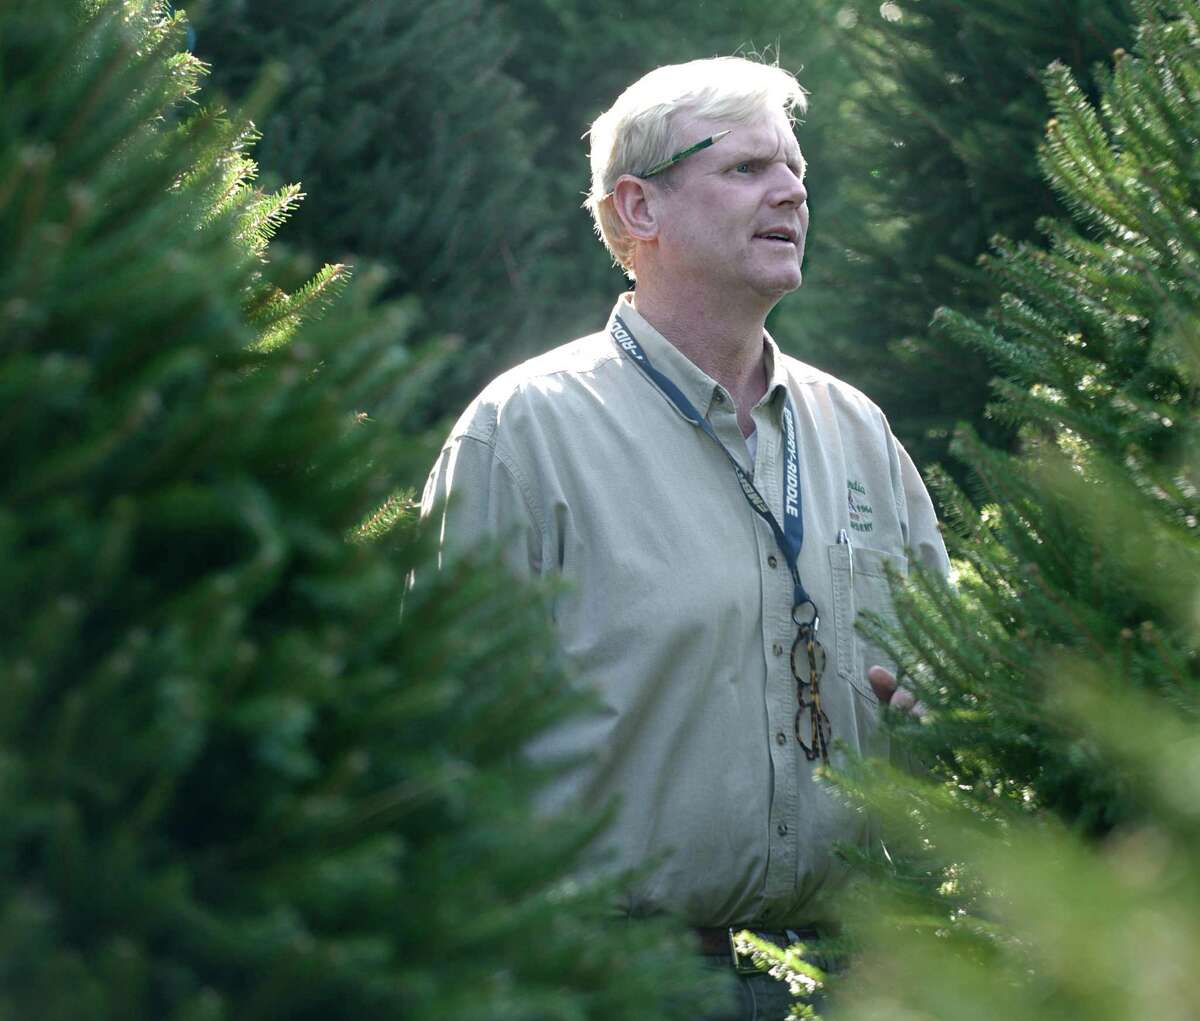 Eugene Reelick, 49, of Bethel, owner of Hollandia Nurseries, in Bethel, Conn, stands among a group of Norway Spruce trees on Hollandia's Old Hawleyville Road property, on Thursday, September 18, 2014.